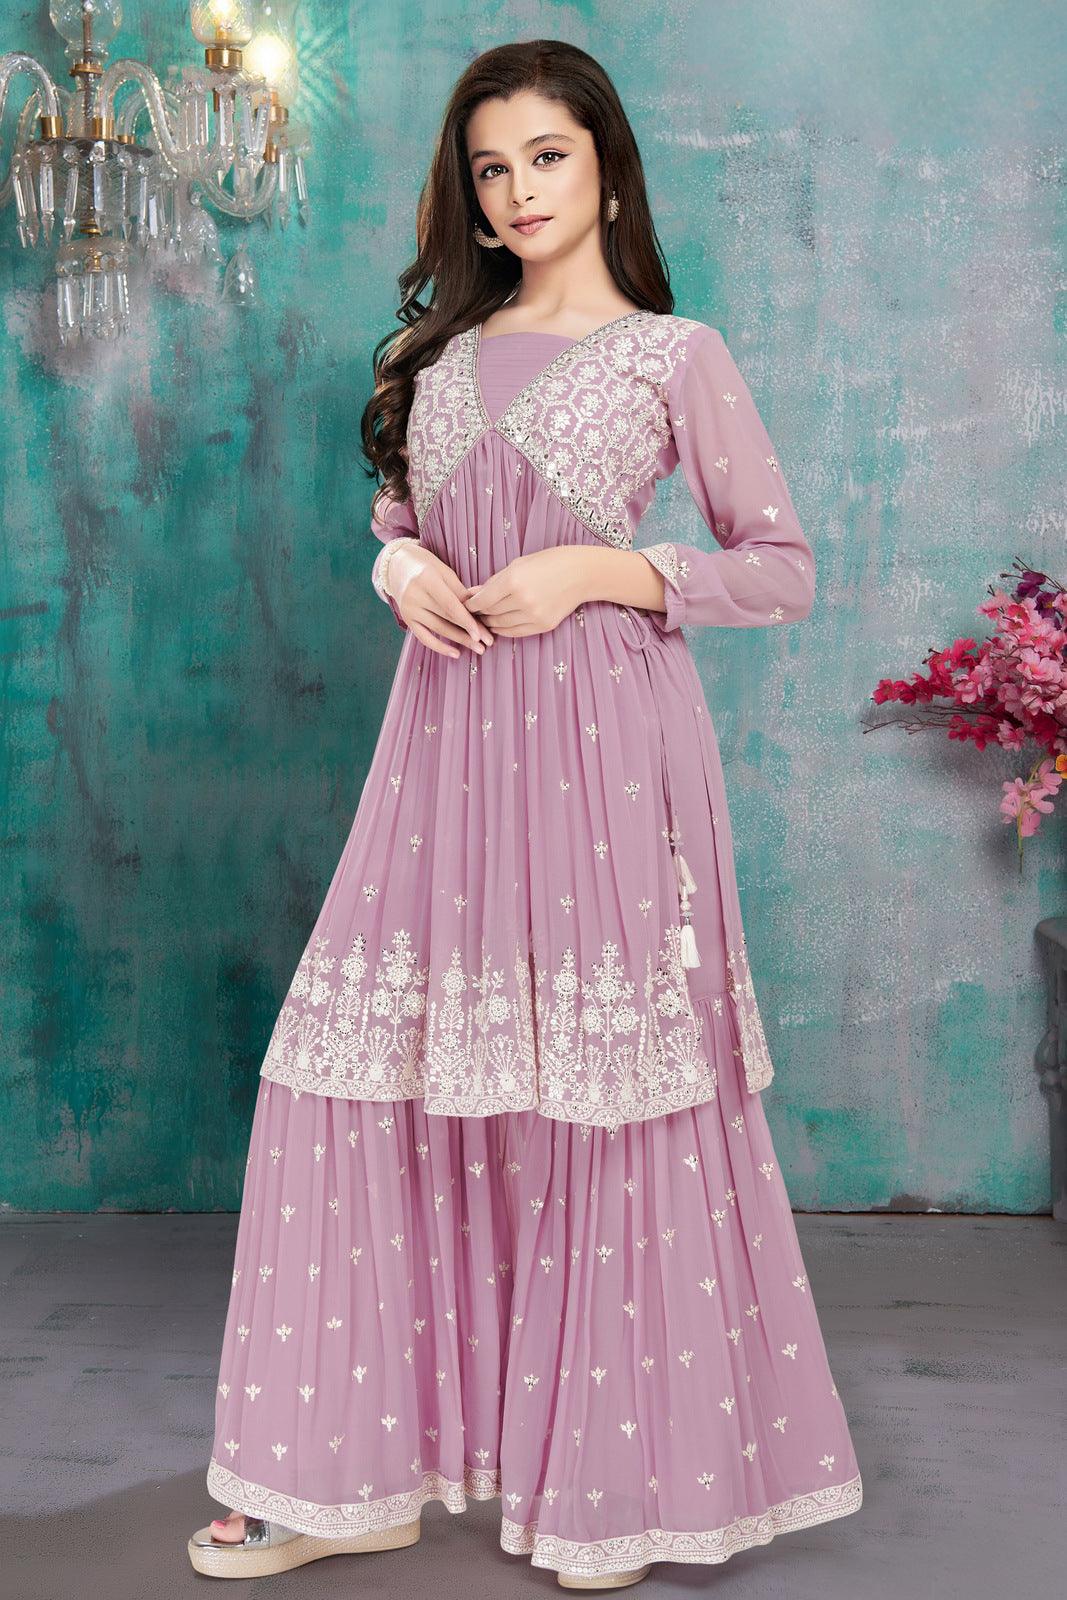 Best Labels To Buy Gorgeous Sharara Suits From!